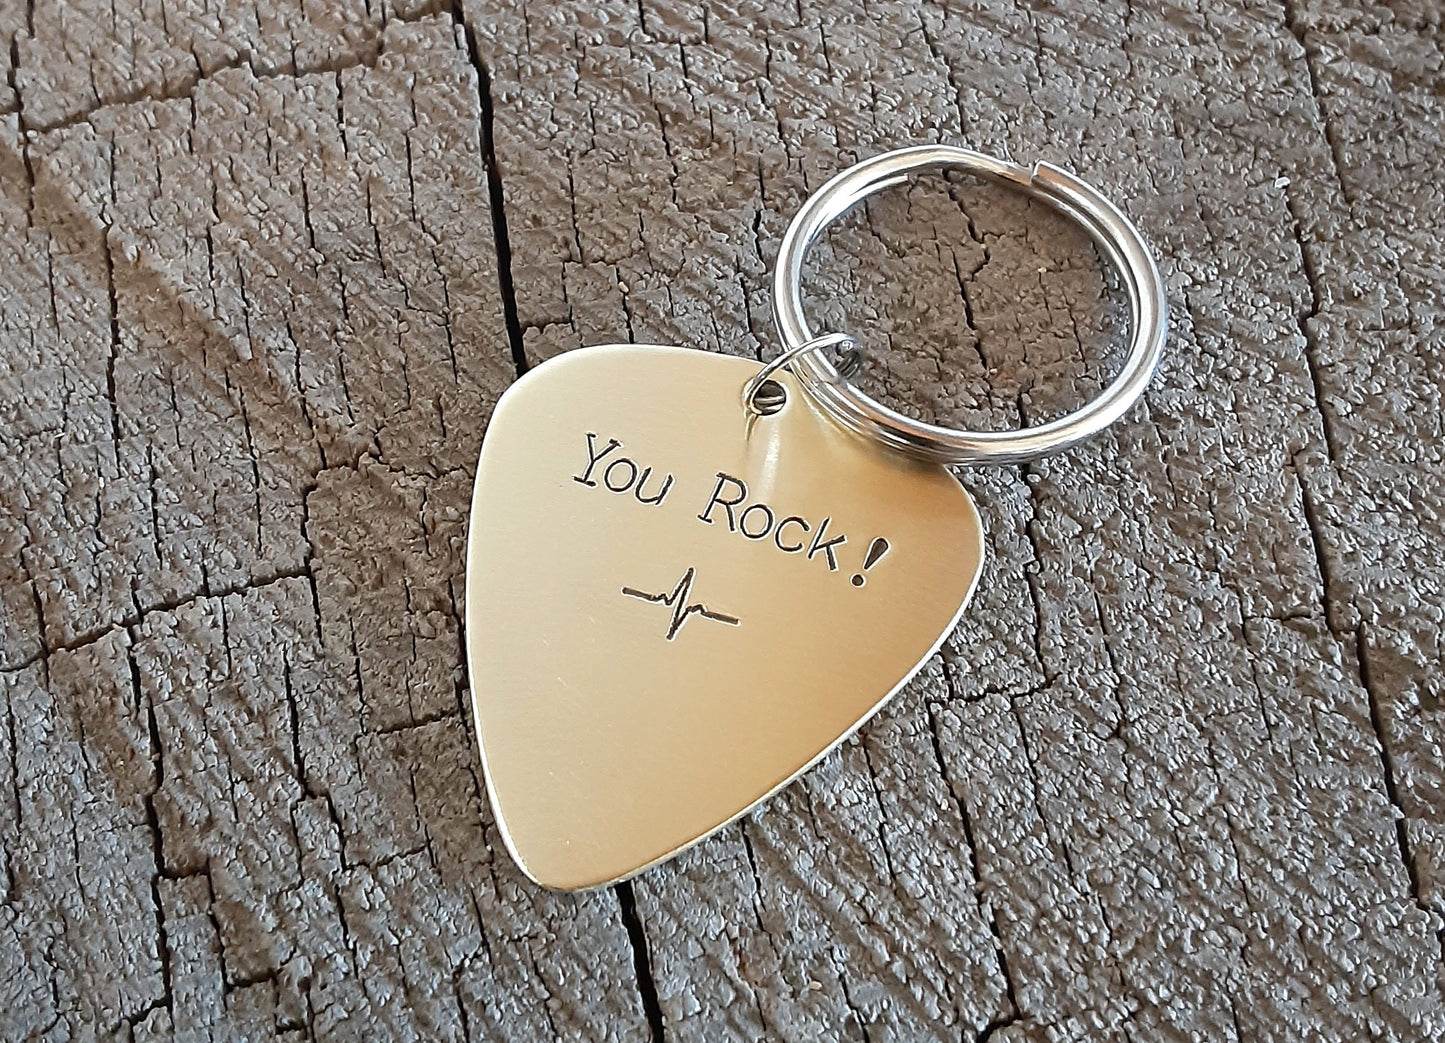 You Rock Bronze Guitar Pick for Nurses and Healthcare Workers